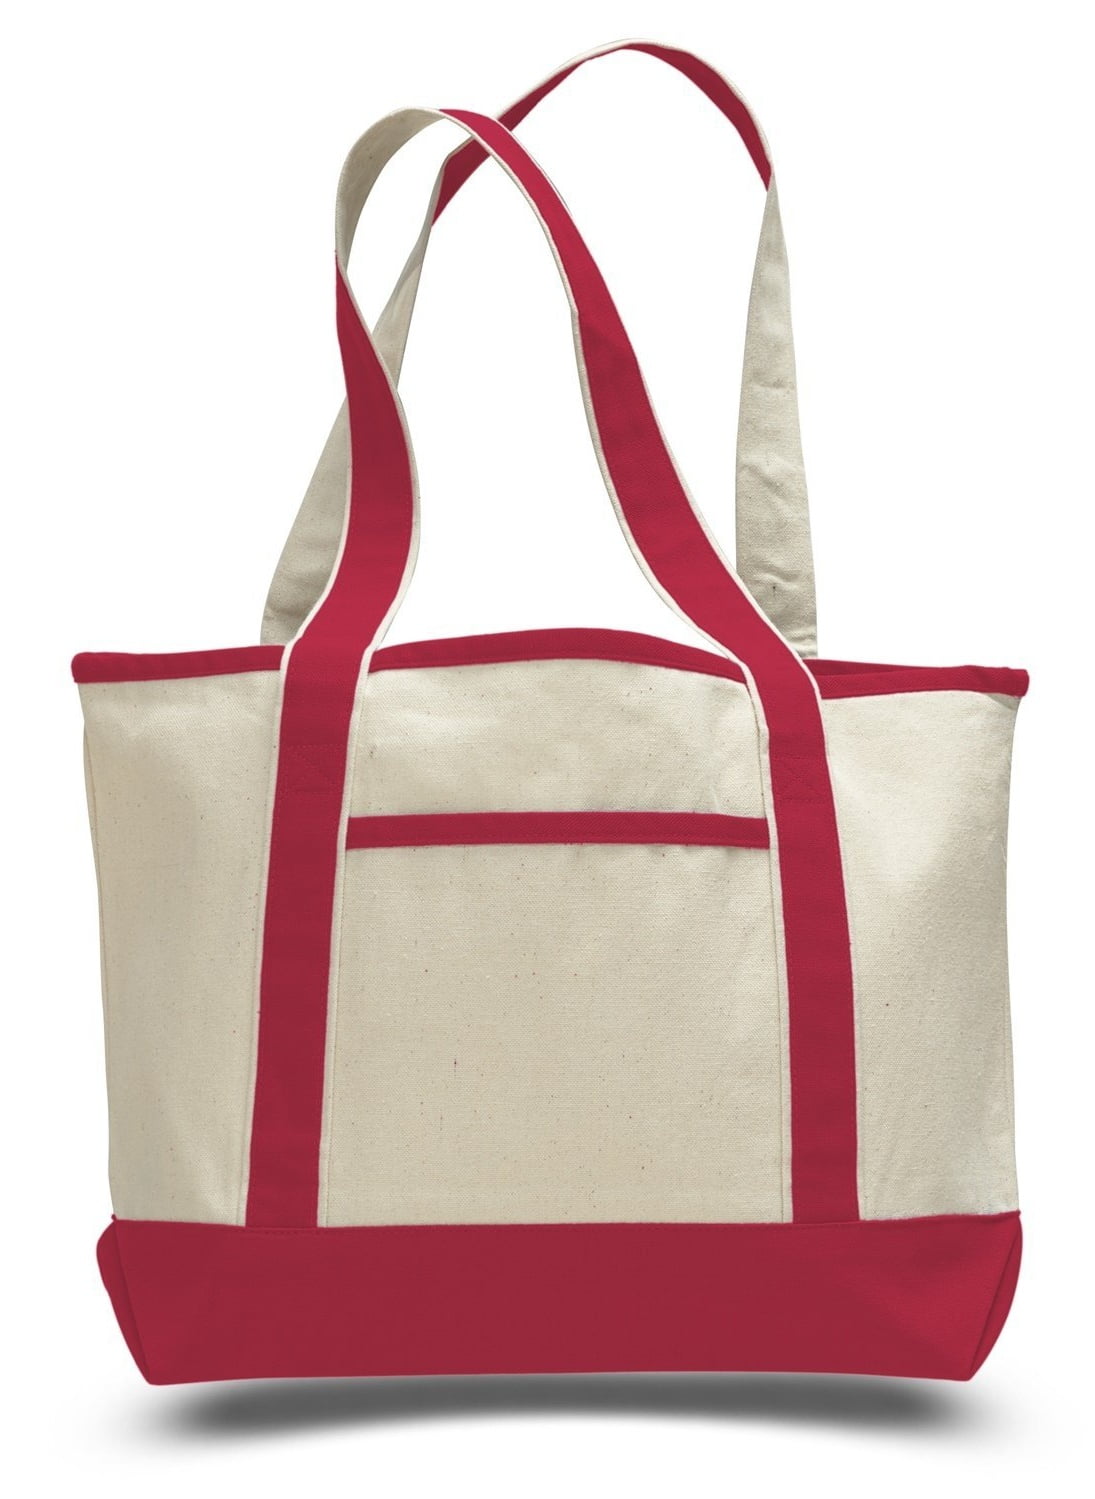 Reusable Grocery Shopping Extra Large Heavy Canvas Boat Tote Bag Beach Totes 